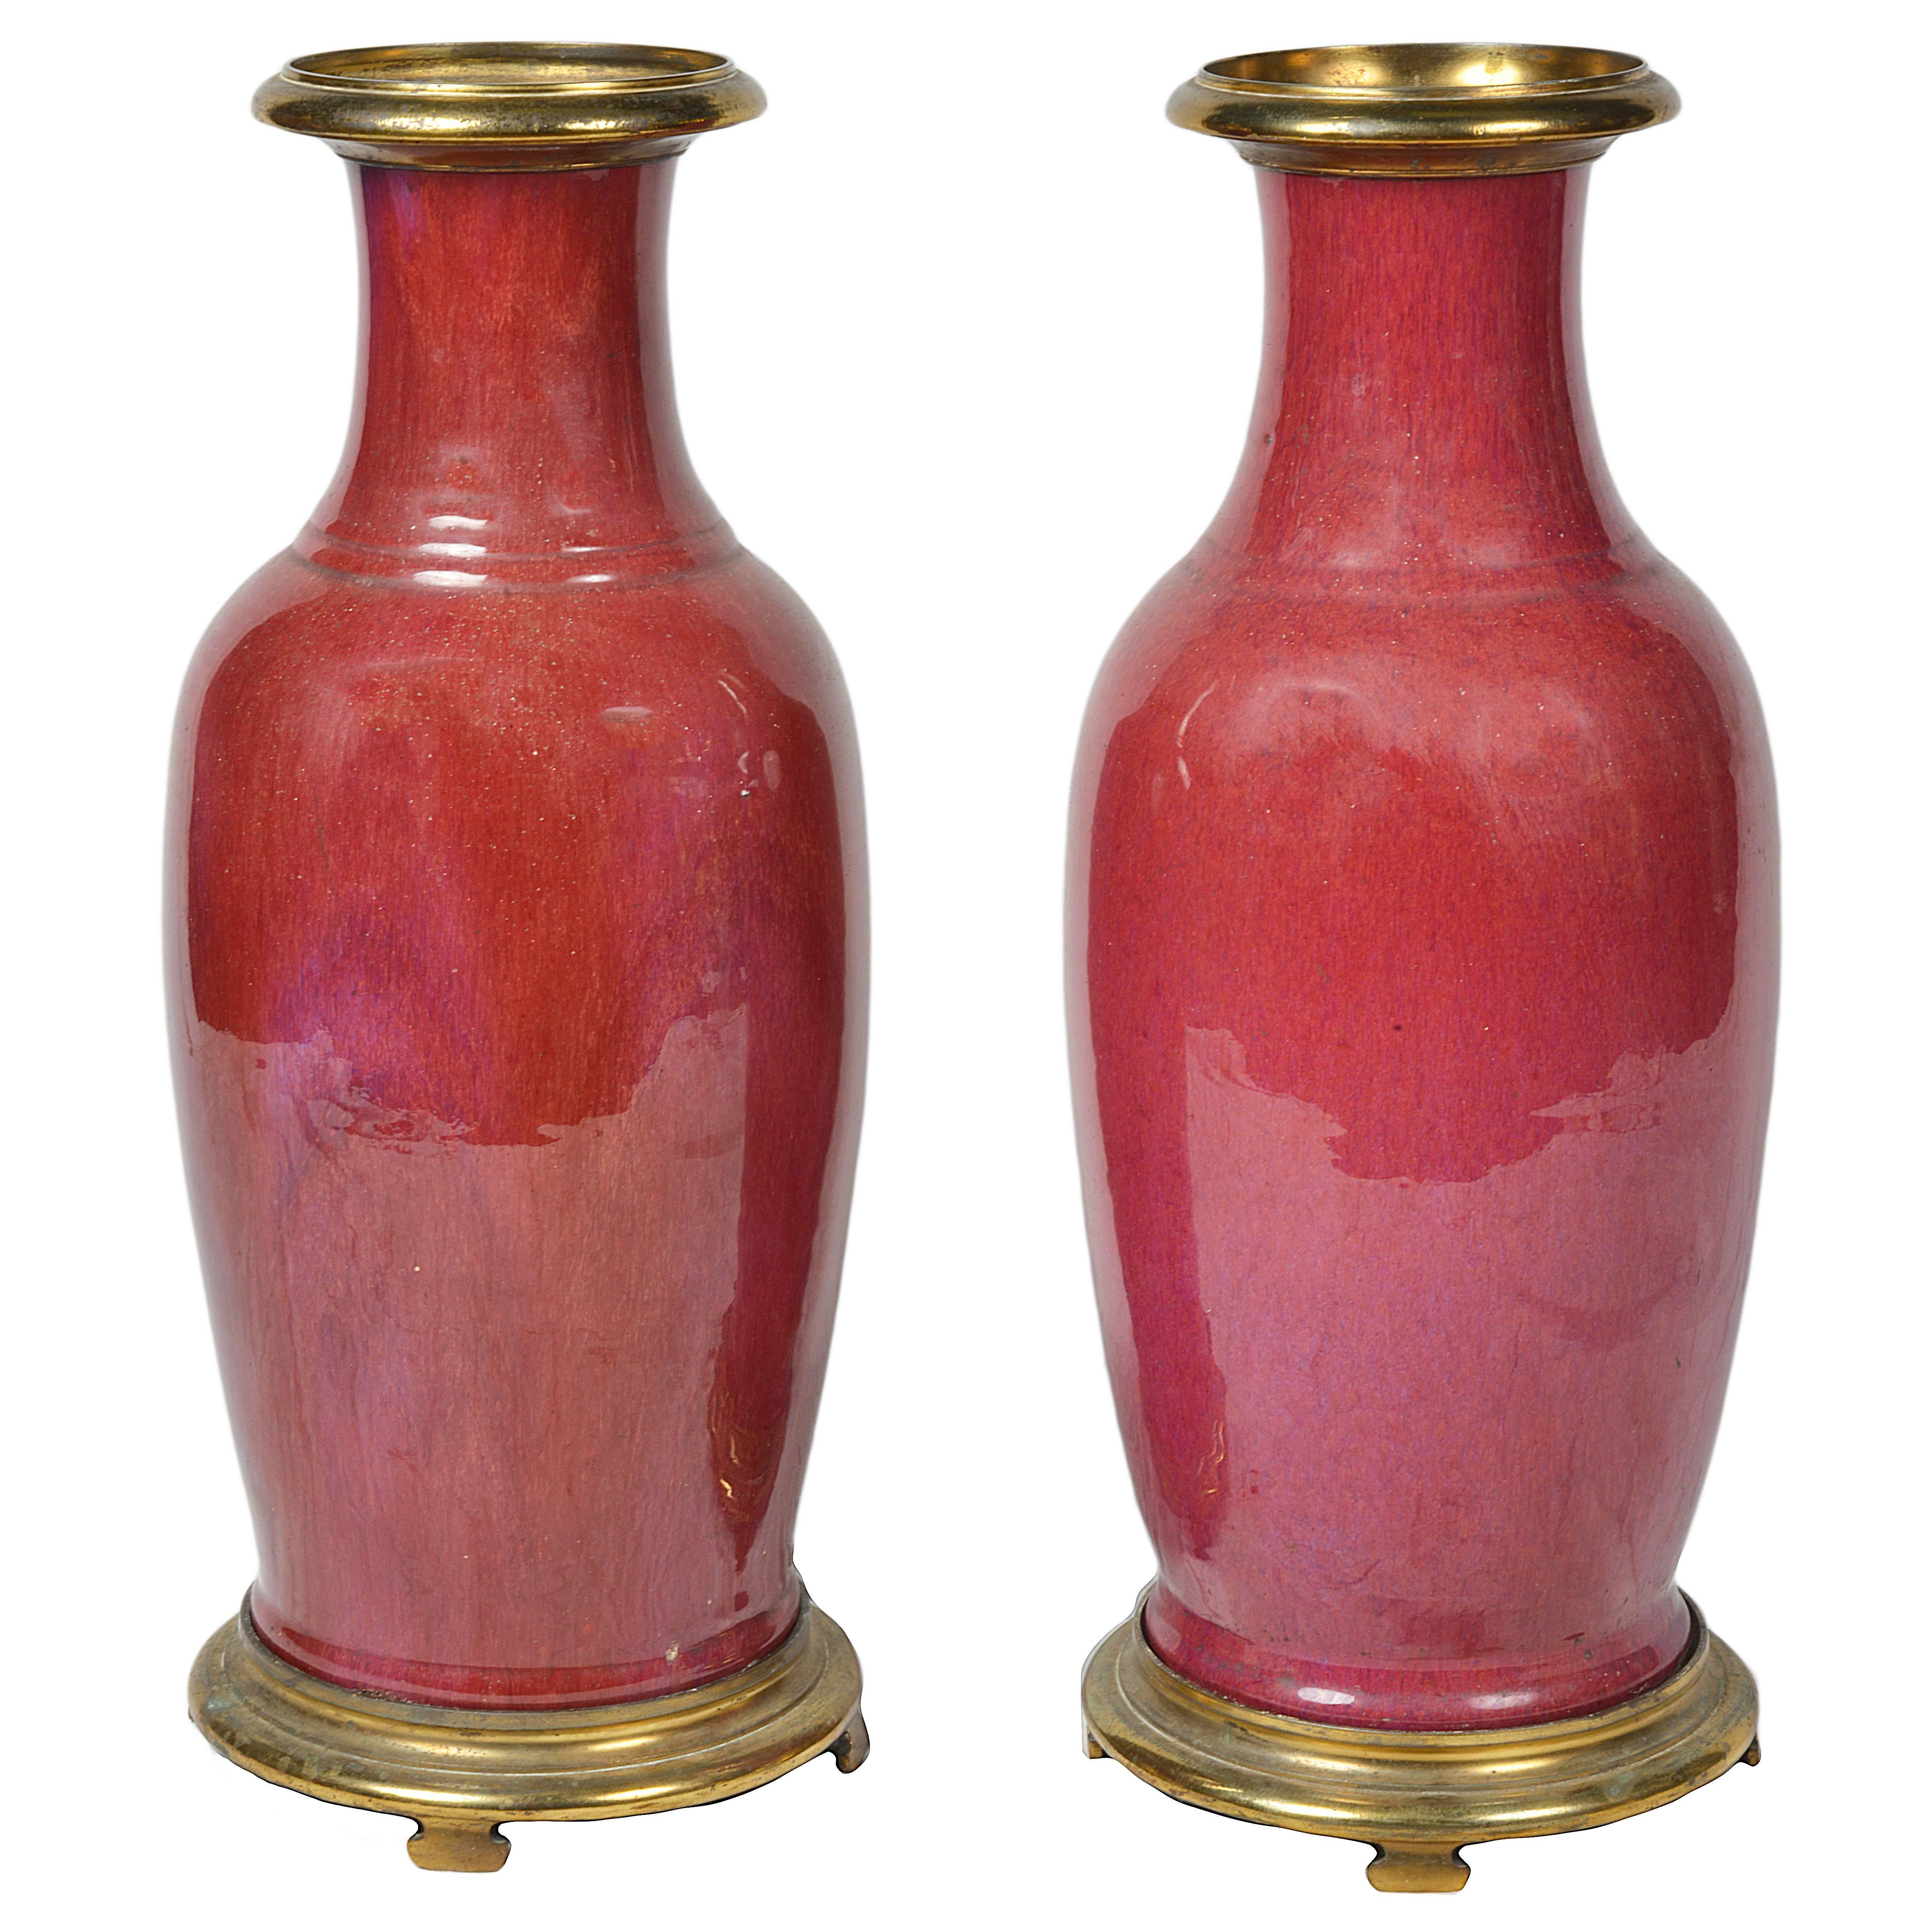 Pair of 19th Century Chinese Sang De Boeuf Vases or Lamps